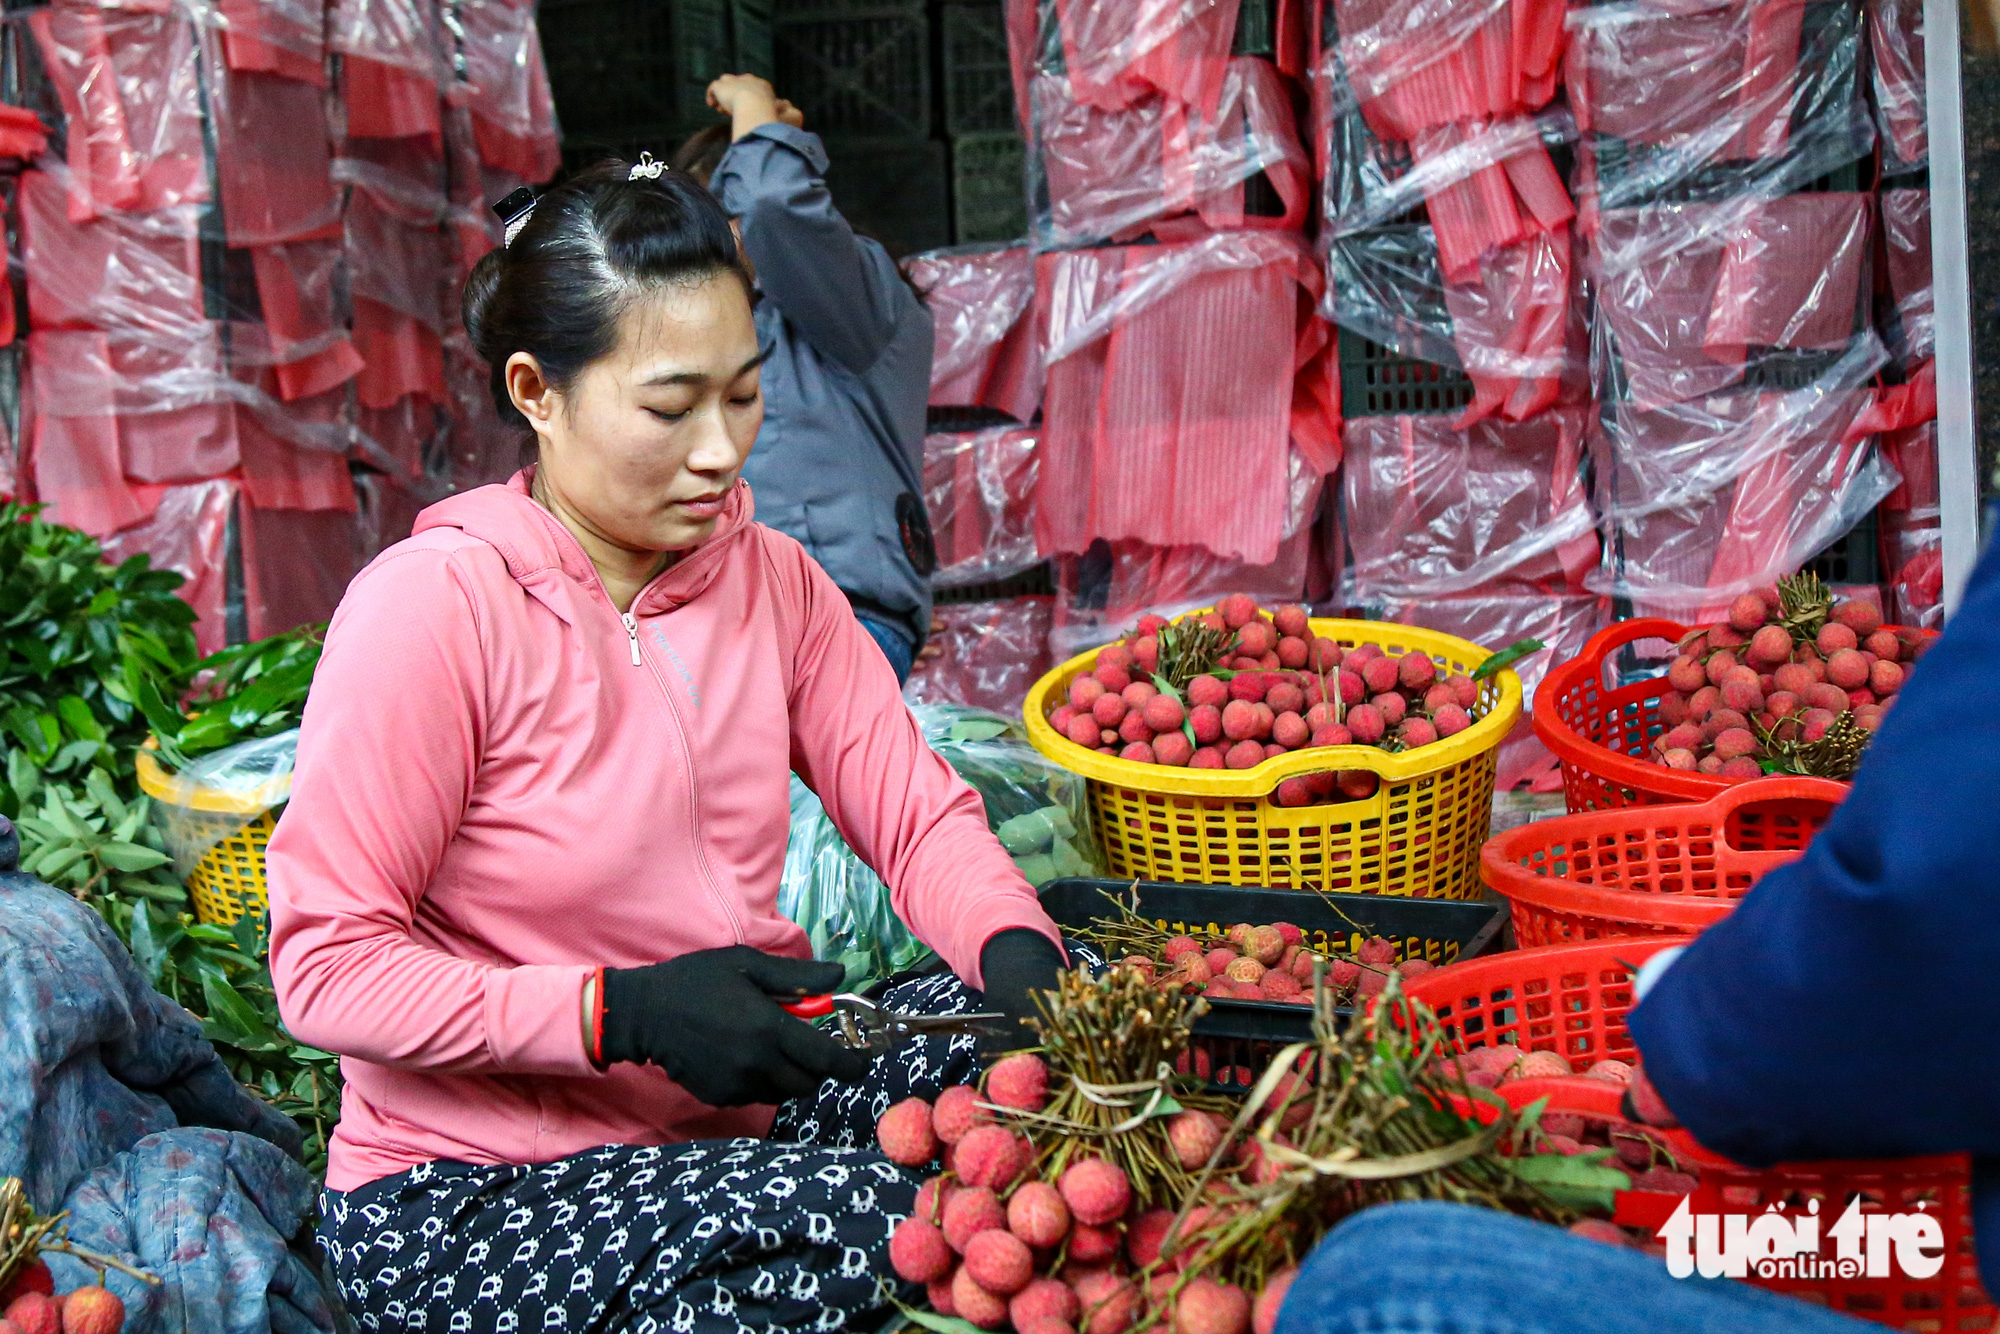 A lychee processing and packaging facility owned by Tran Thi Lich in Chu Town has some 40 employees who are working hard to ship a huge volume of lychees to China. Photo: Ha Quan / Tuoi Tre